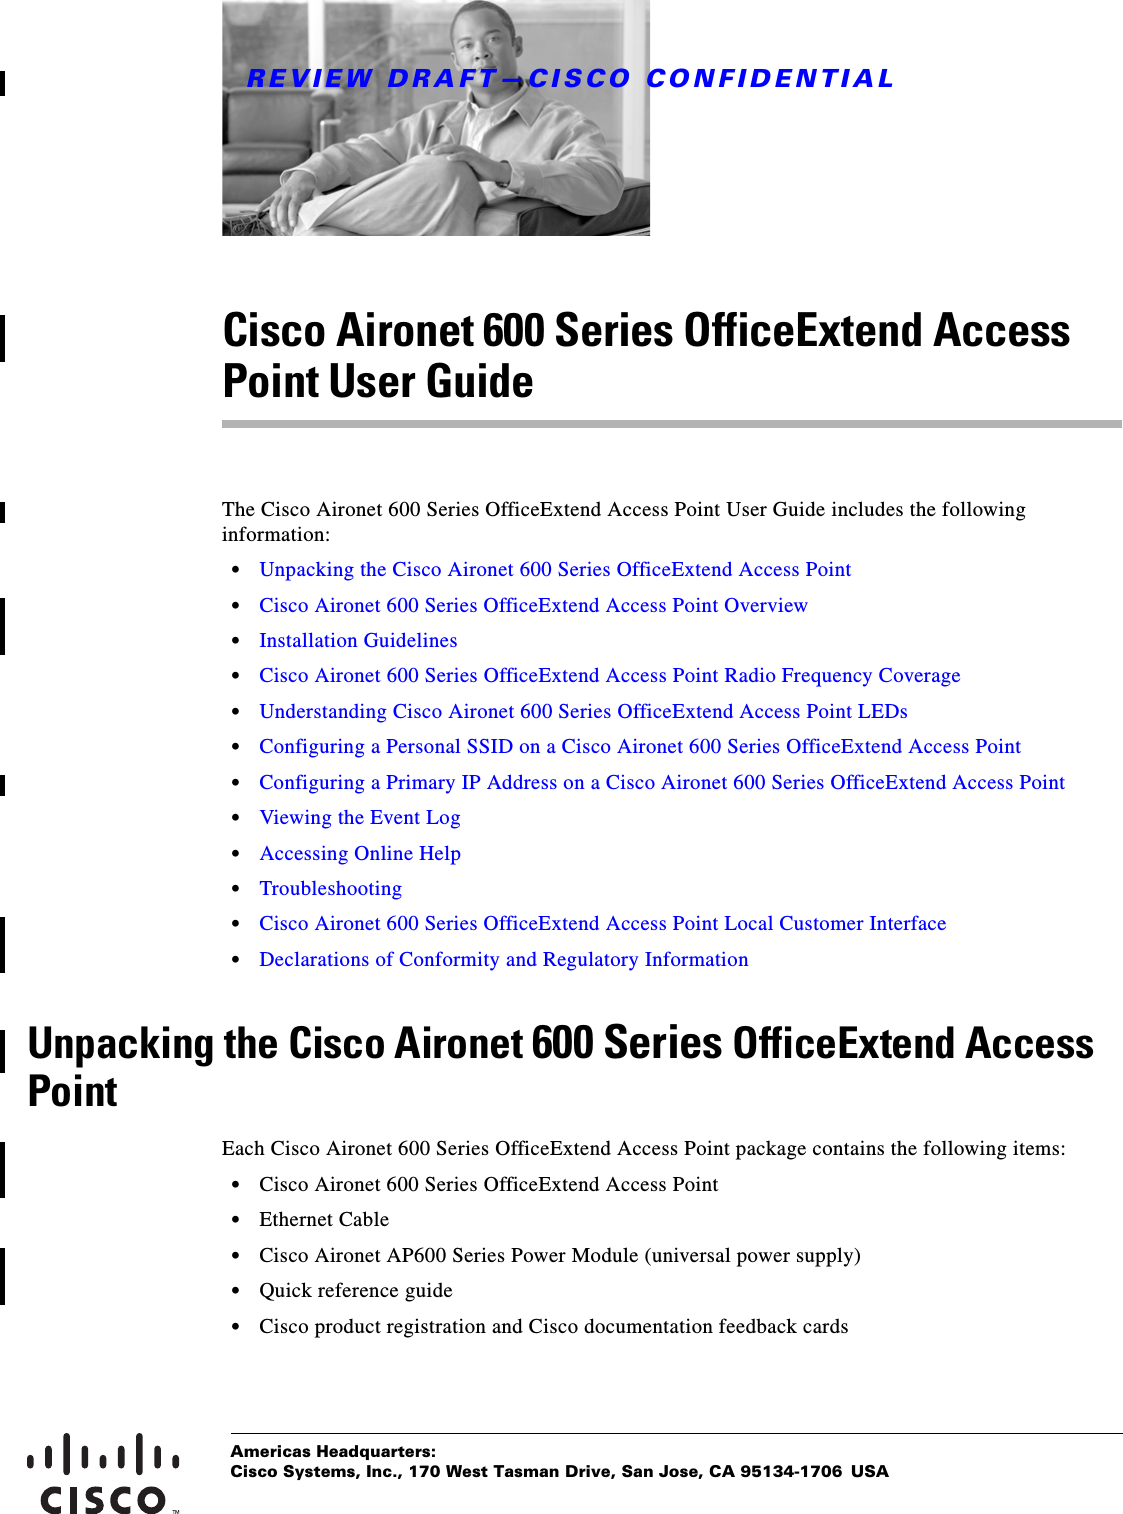 REVIEW DRAFT—CISCO CONFIDENTIALAmericas Headquarters:Cisco Systems, Inc., 170 West Tasman Drive, San Jose, CA 95134-1706 USACisco Aironet 600 Series OfficeExtend Access Point User GuideThe Cisco Aironet 600 Series OfficeExtend Access Point User Guide includes the following information:  • Unpacking the Cisco Aironet 600 Series OfficeExtend Access Point  • Cisco Aironet 600 Series OfficeExtend Access Point Overview  • Installation Guidelines  • Cisco Aironet 600 Series OfficeExtend Access Point Radio Frequency Coverage  • Understanding Cisco Aironet 600 Series OfficeExtend Access Point LEDs  • Configuring a Personal SSID on a Cisco Aironet 600 Series OfficeExtend Access Point  • Configuring a Primary IP Address on a Cisco Aironet 600 Series OfficeExtend Access Point  • Viewing the Event Log  • Accessing Online Help  • Troubleshooting  • Cisco Aironet 600 Series OfficeExtend Access Point Local Customer Interface  • Declarations of Conformity and Regulatory InformationUnpacking the Cisco Aironet 600 Series OfficeExtend Access PointEach Cisco Aironet 600 Series OfficeExtend Access Point package contains the following items:  • Cisco Aironet 600 Series OfficeExtend Access Point  • Ethernet Cable  • Cisco Aironet AP600 Series Power Module (universal power supply)  • Quick reference guide  • Cisco product registration and Cisco documentation feedback cards